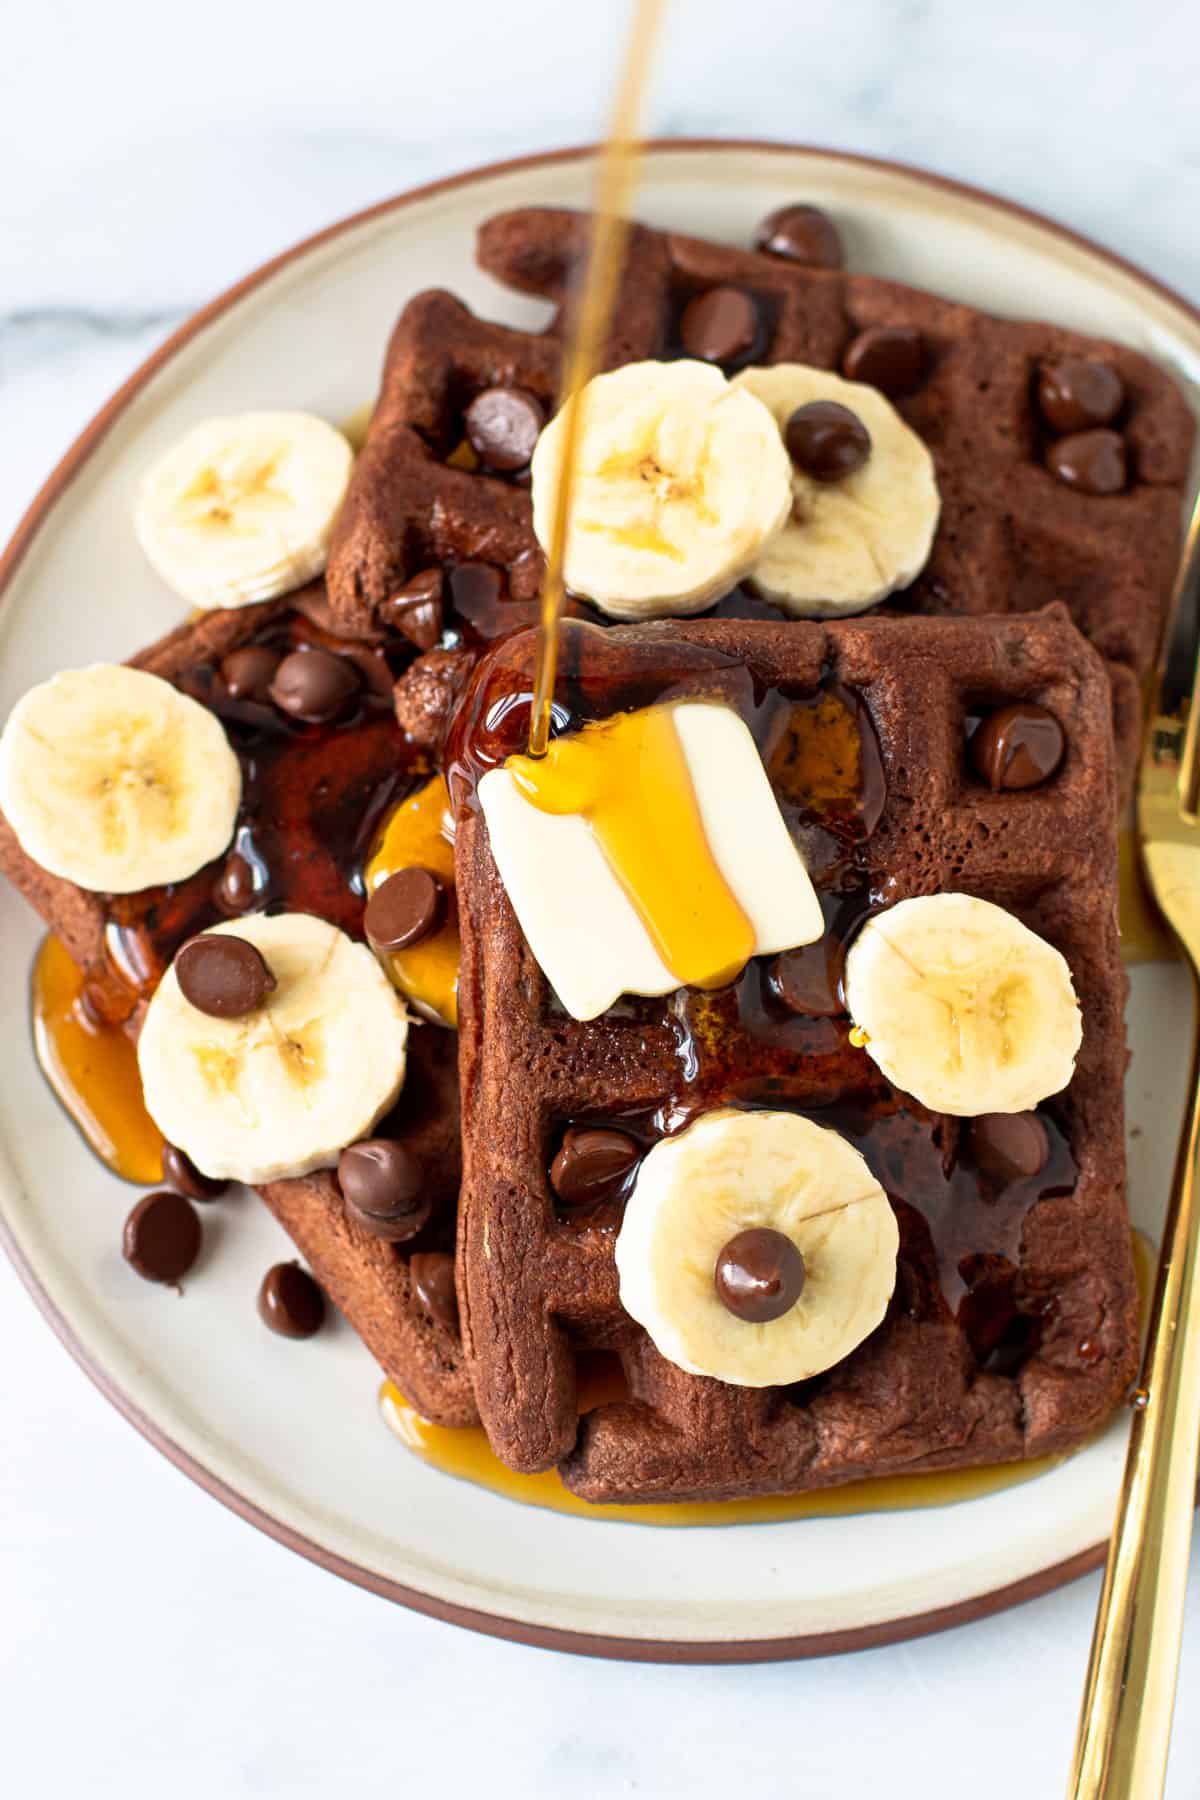 Chocolate banana waffles with chocolate chips, butter and maple syrup.